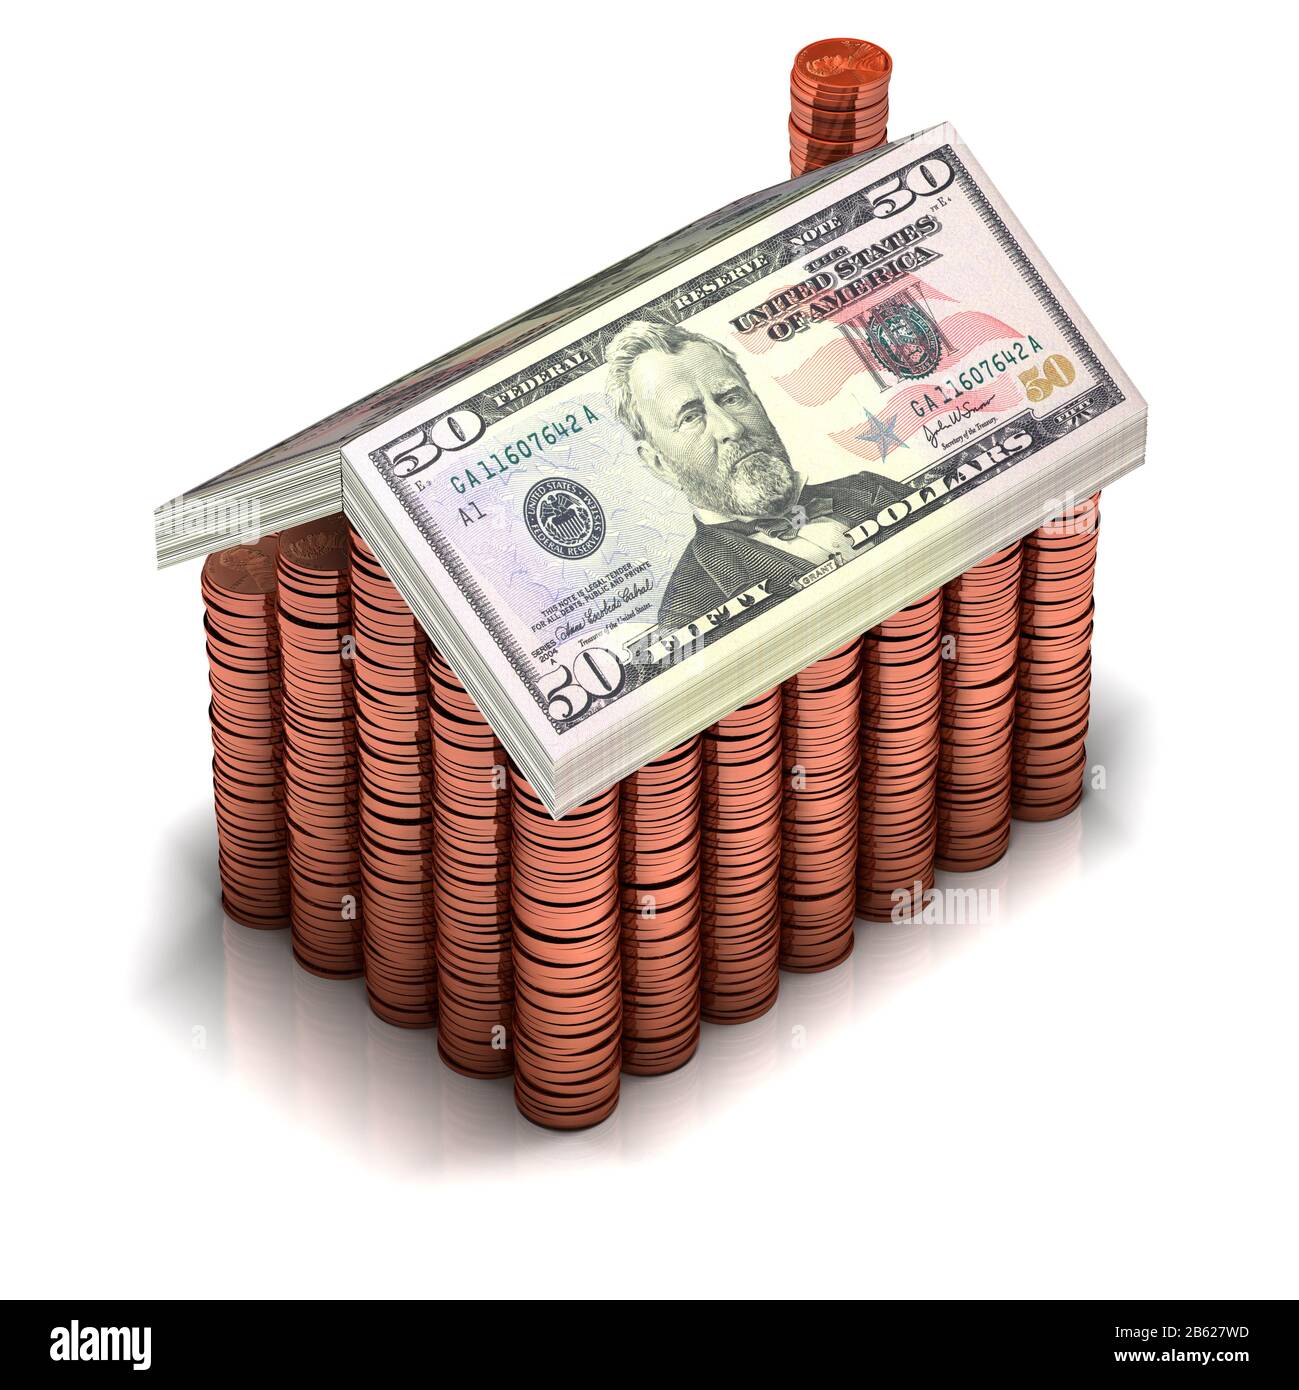 Safe as Houses. A house made of dollar coins & dollar bills. banknotes. Mortgage, Finance. Economy. Family finances. Security. Asset. Stock Photo